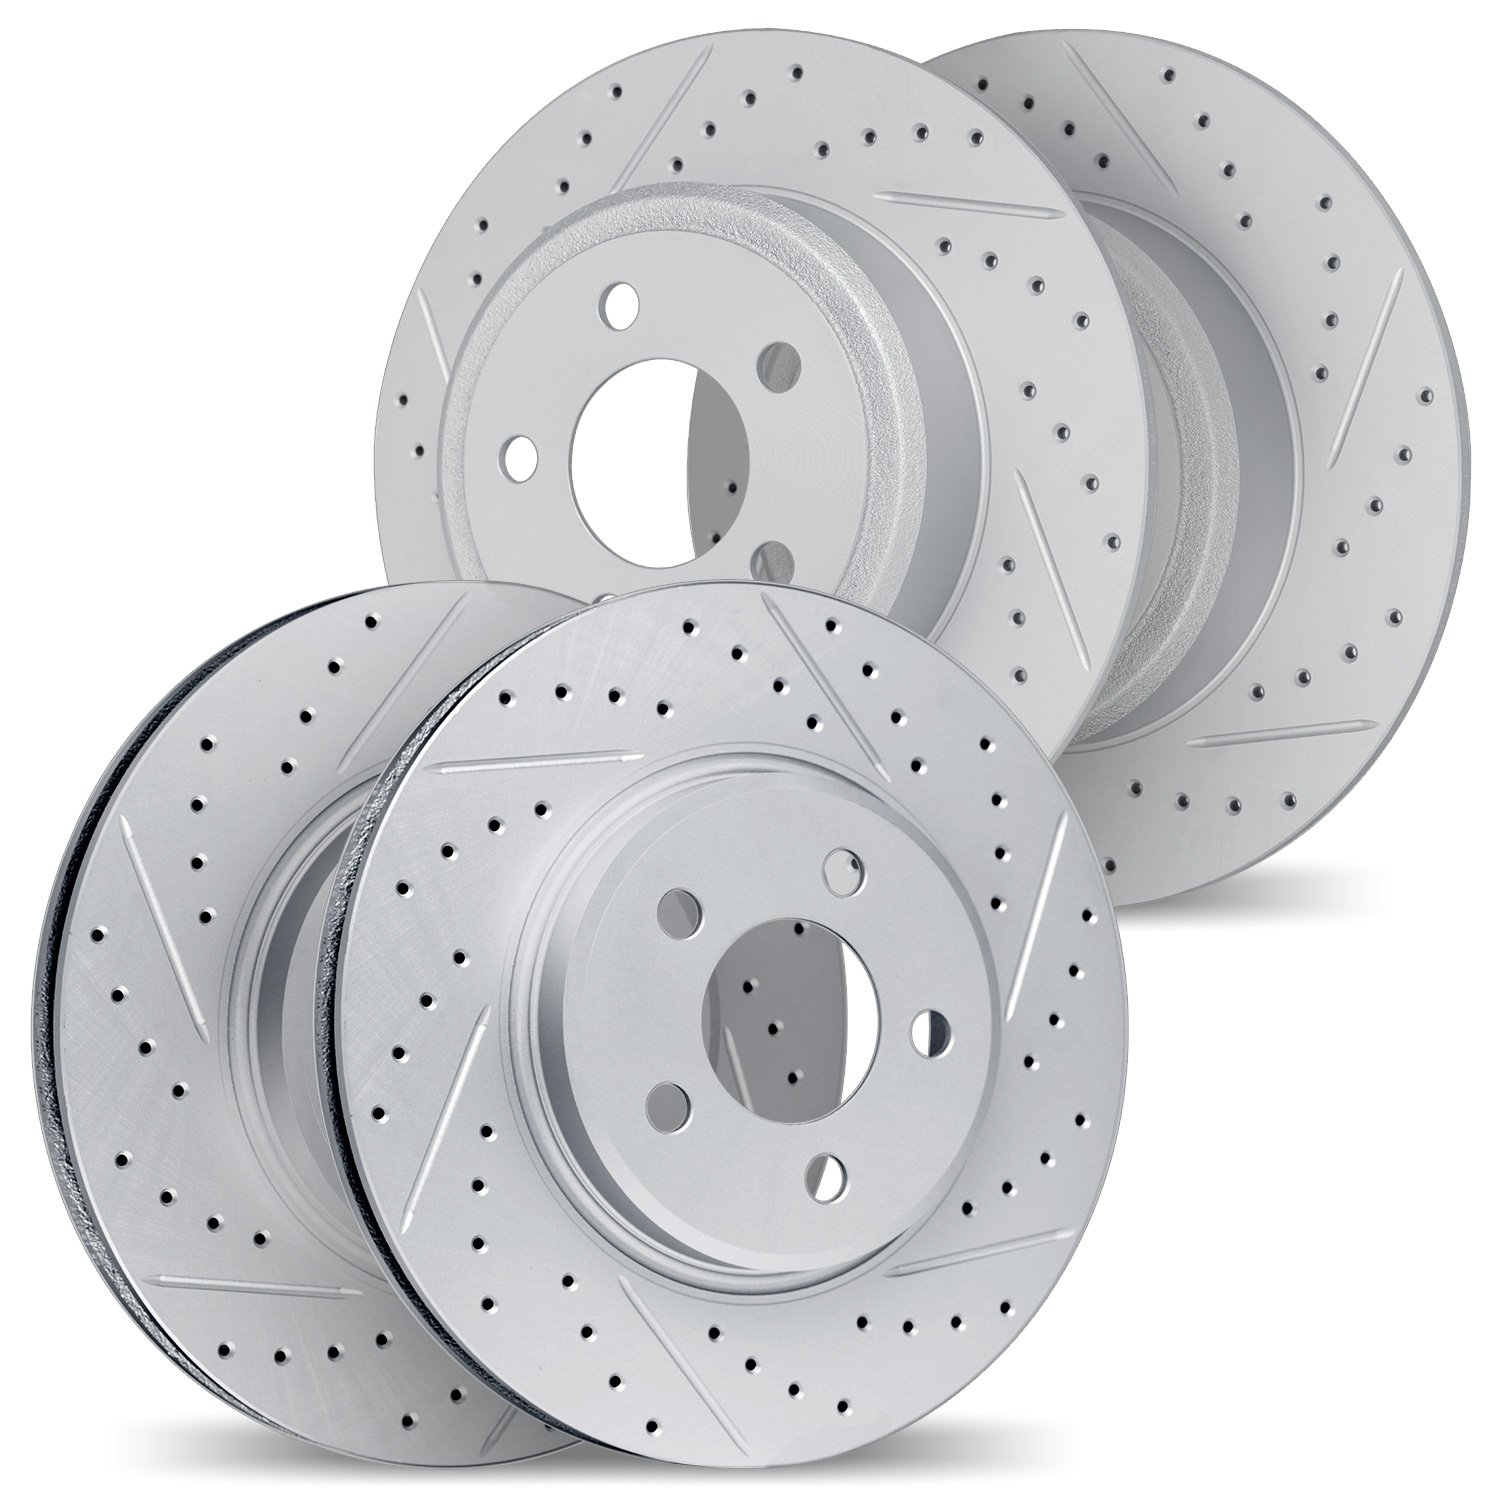 2004-03013 Geoperformance Drilled/Slotted Brake Rotors, 2013-2020 Kia/Hyundai/Genesis, Position: Front and Rear